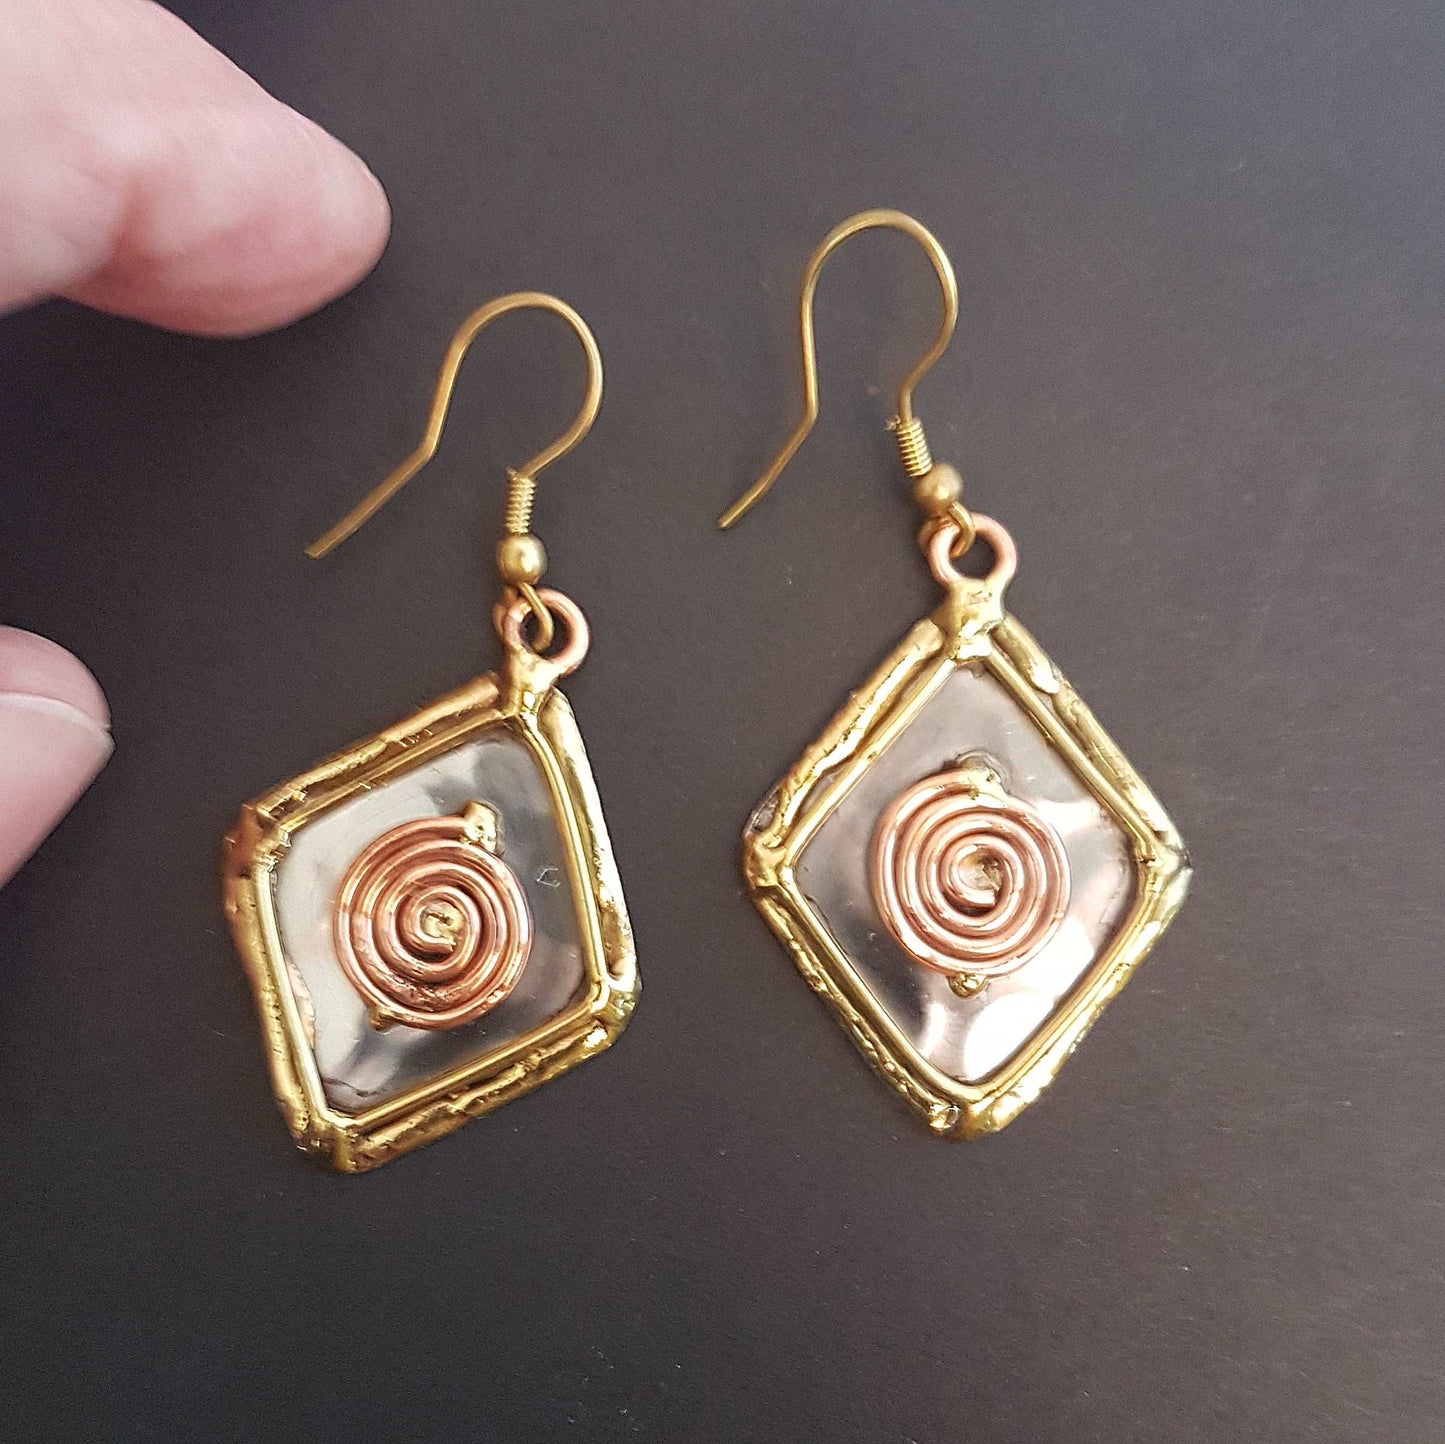 Celtic silver earrings in a diamond shape with gold and copper tone wirework detail.